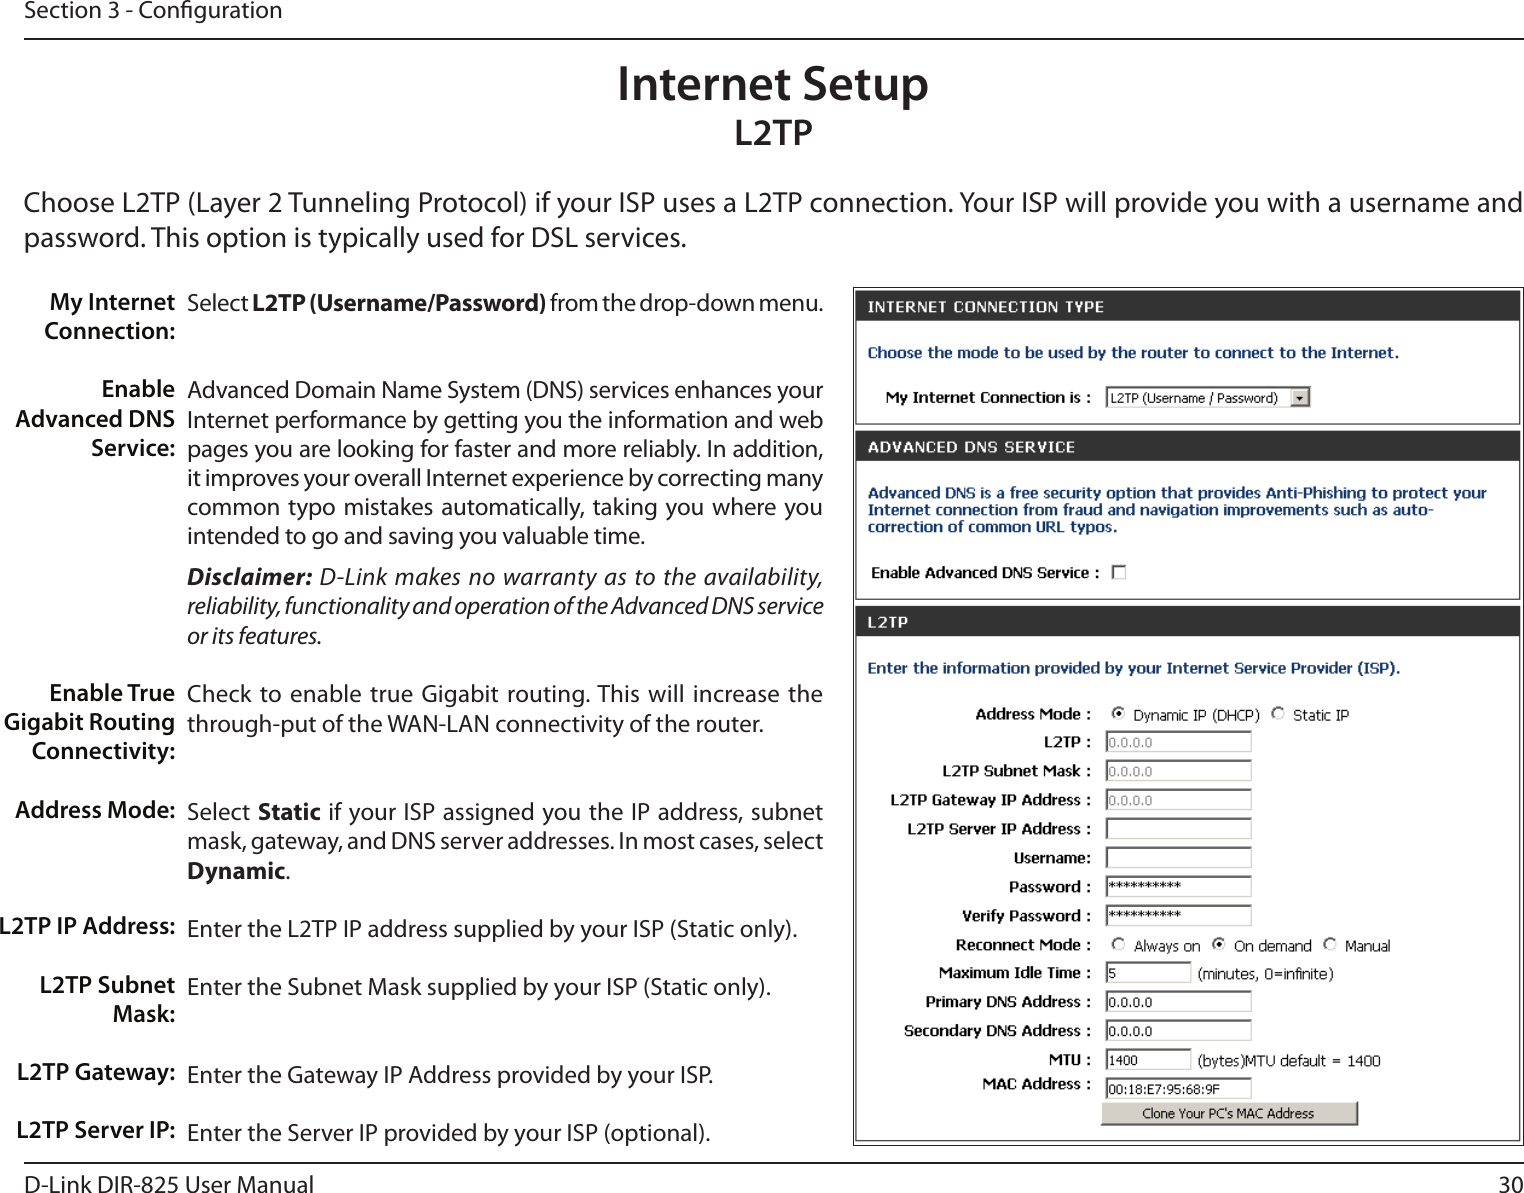 30D-Link DIR-825 User ManualSection 3 - CongurationSelect L2TP (Username/Password) from the drop-down menu.Advanced Domain Name System (DNS) services enhances your Internet performance by getting you the information and web pages you are looking for faster and more reliably. In addition, it improves your overall Internet experience by correcting many common typo mistakes automatically, taking you where you intended to go and saving you valuable time.Disclaimer: D-Link makes no warranty as to the availability, reliability, functionality and operation of the Advanced DNS service or its features.Check to enable true  Gigabit routing. This will increase the through-put of the WAN-LAN connectivity of the router.Select Static if your ISP assigned you the IP address, subnet mask, gateway, and DNS server addresses. In most cases, select Dynamic.Enter the L2TP IP address supplied by your ISP (Static only).Enter the Subnet Mask supplied by your ISP (Static only).Enter the Gateway IP Address provided by your ISP.Enter the Server IP provided by your ISP (optional).My Internet Connection:Enable Advanced DNS Service:Enable True Gigabit Routing Connectivity:Address Mode:L2TP IP Address:L2TP Subnet Mask:L2TP Gateway:L2TP Server IP:Internet SetupL2TPChoose L2TP (Layer 2 Tunneling Protocol) if your ISP uses a L2TP connection. Your ISP will provide you with a username and password. This option is typically used for DSL services. 